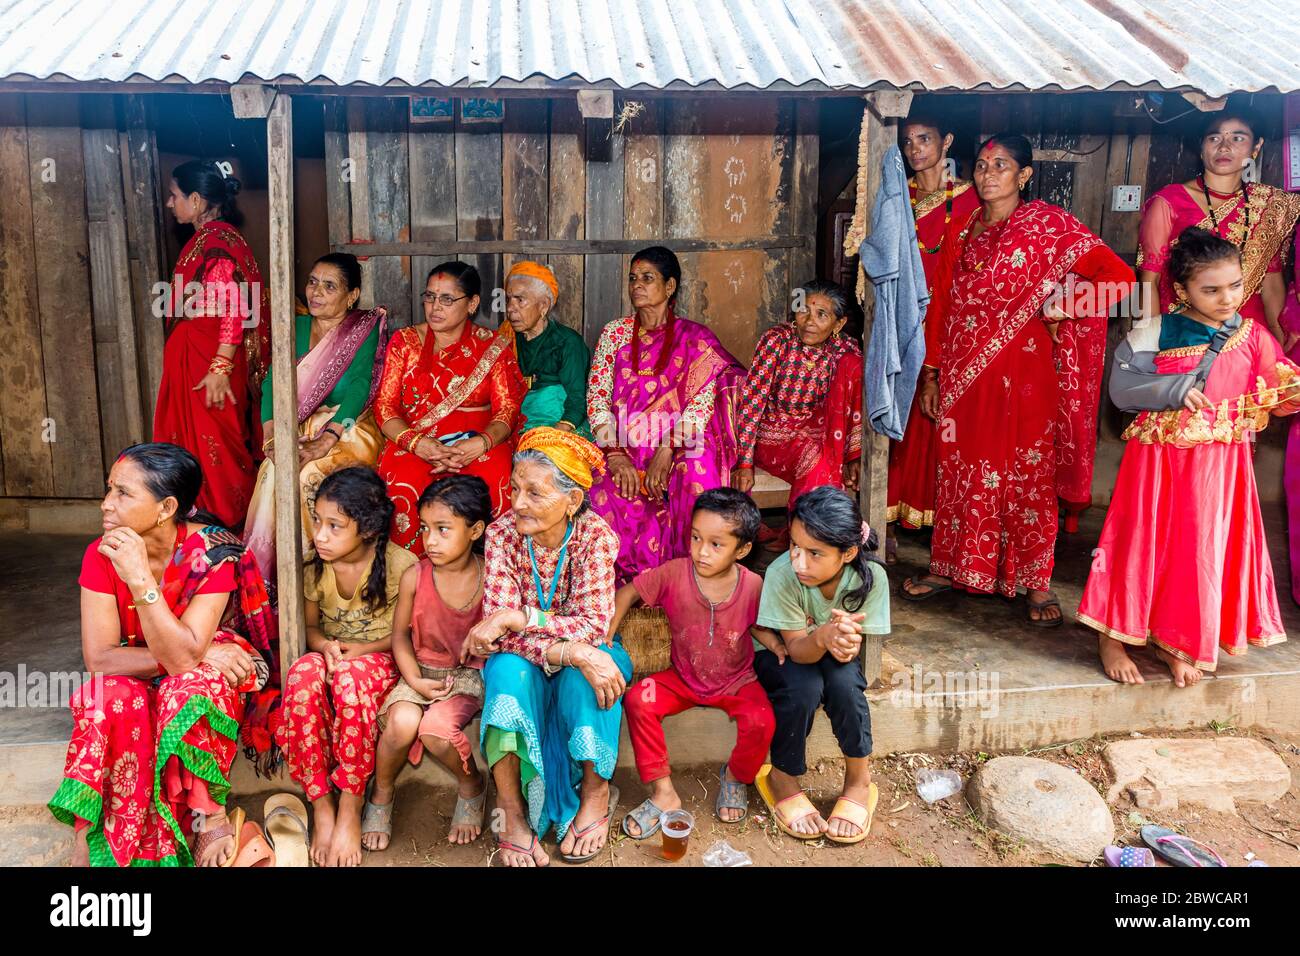 Gorkha,Nepal - June 25,2019: Nepali Women with traditional attire during wedding ceremony in rural village of Nepal. Stock Photo